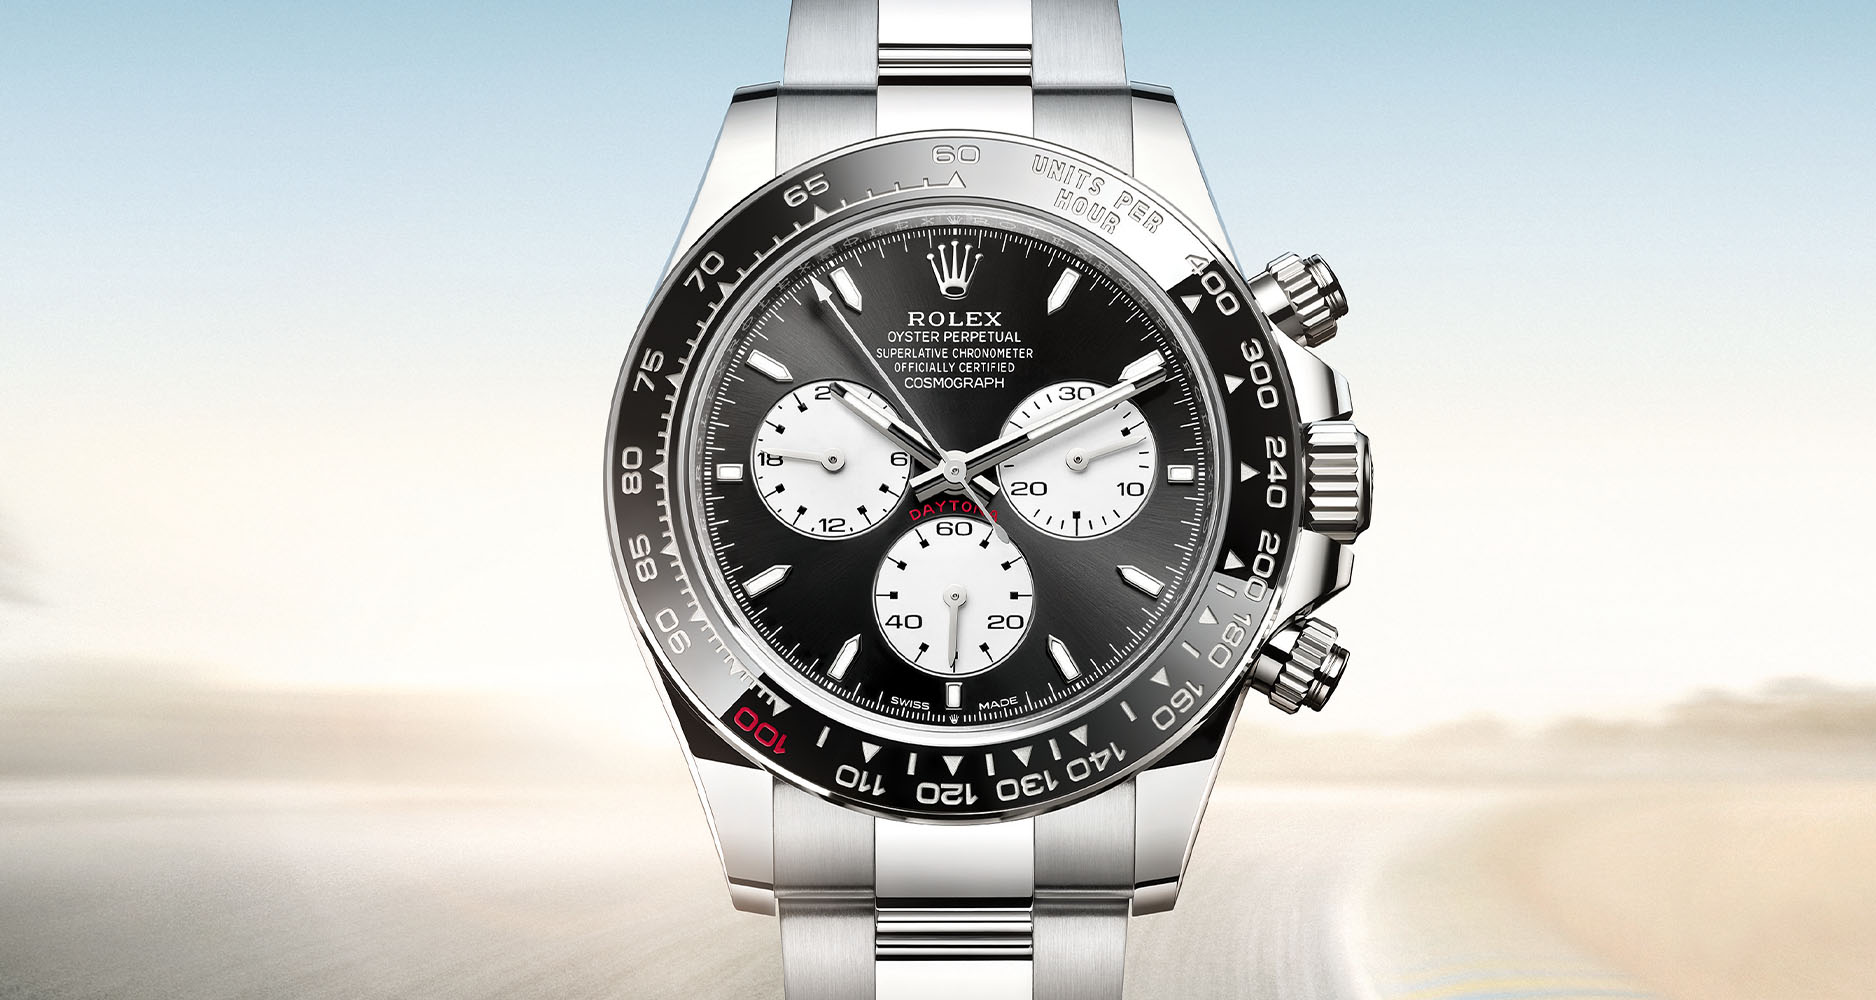 The Rolex Oyster Perpetual Cosmograph Daytona Le Mans Anniversary Edition.